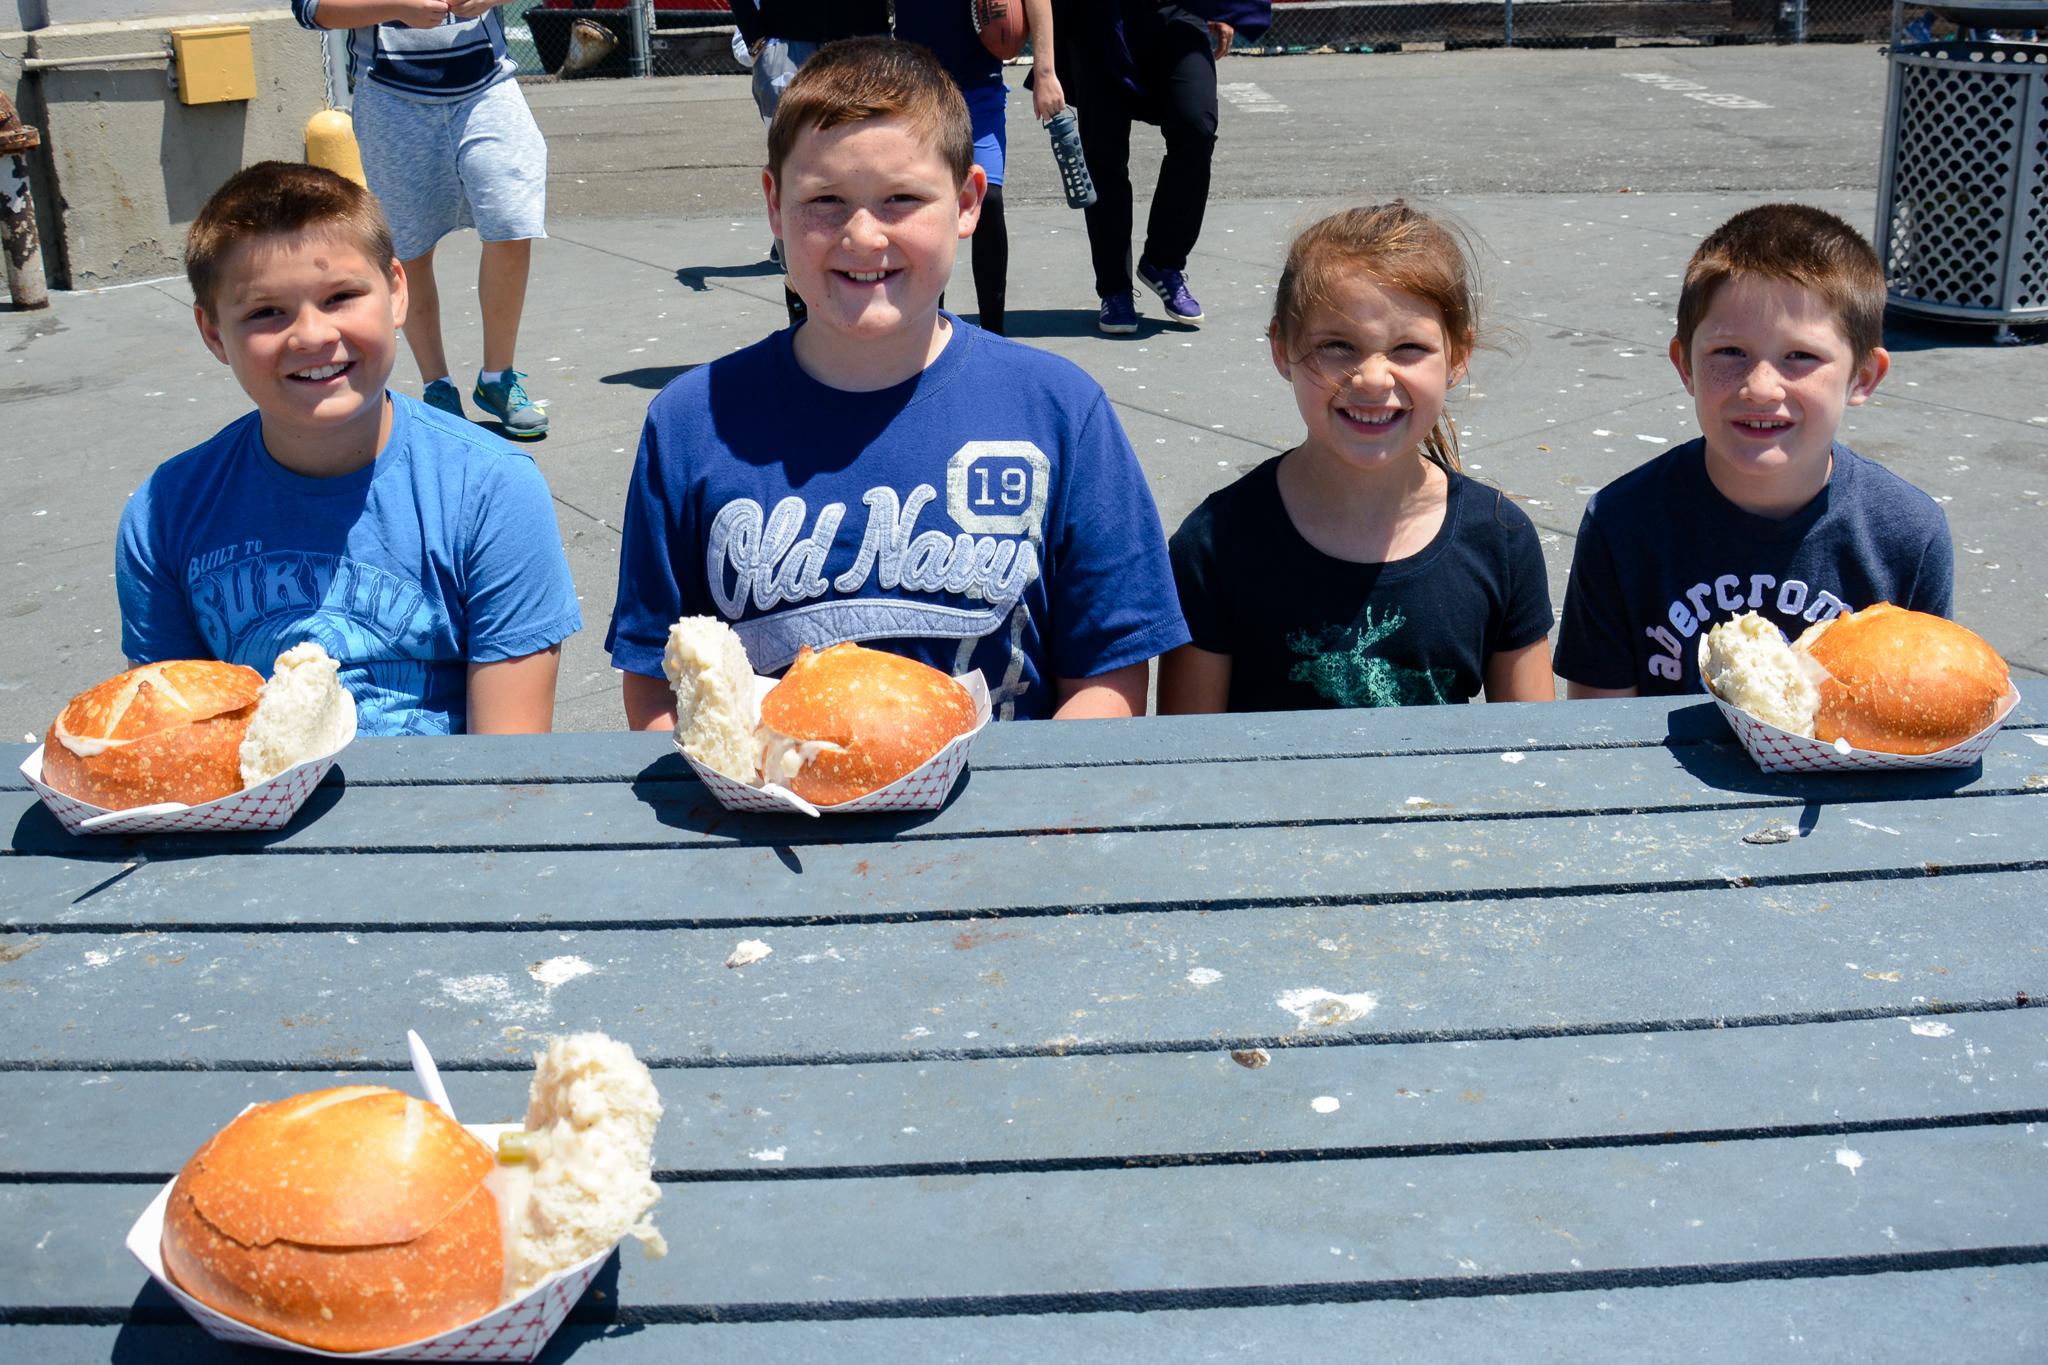 Smiling kids with clam chowder bread bowls in San Francisco